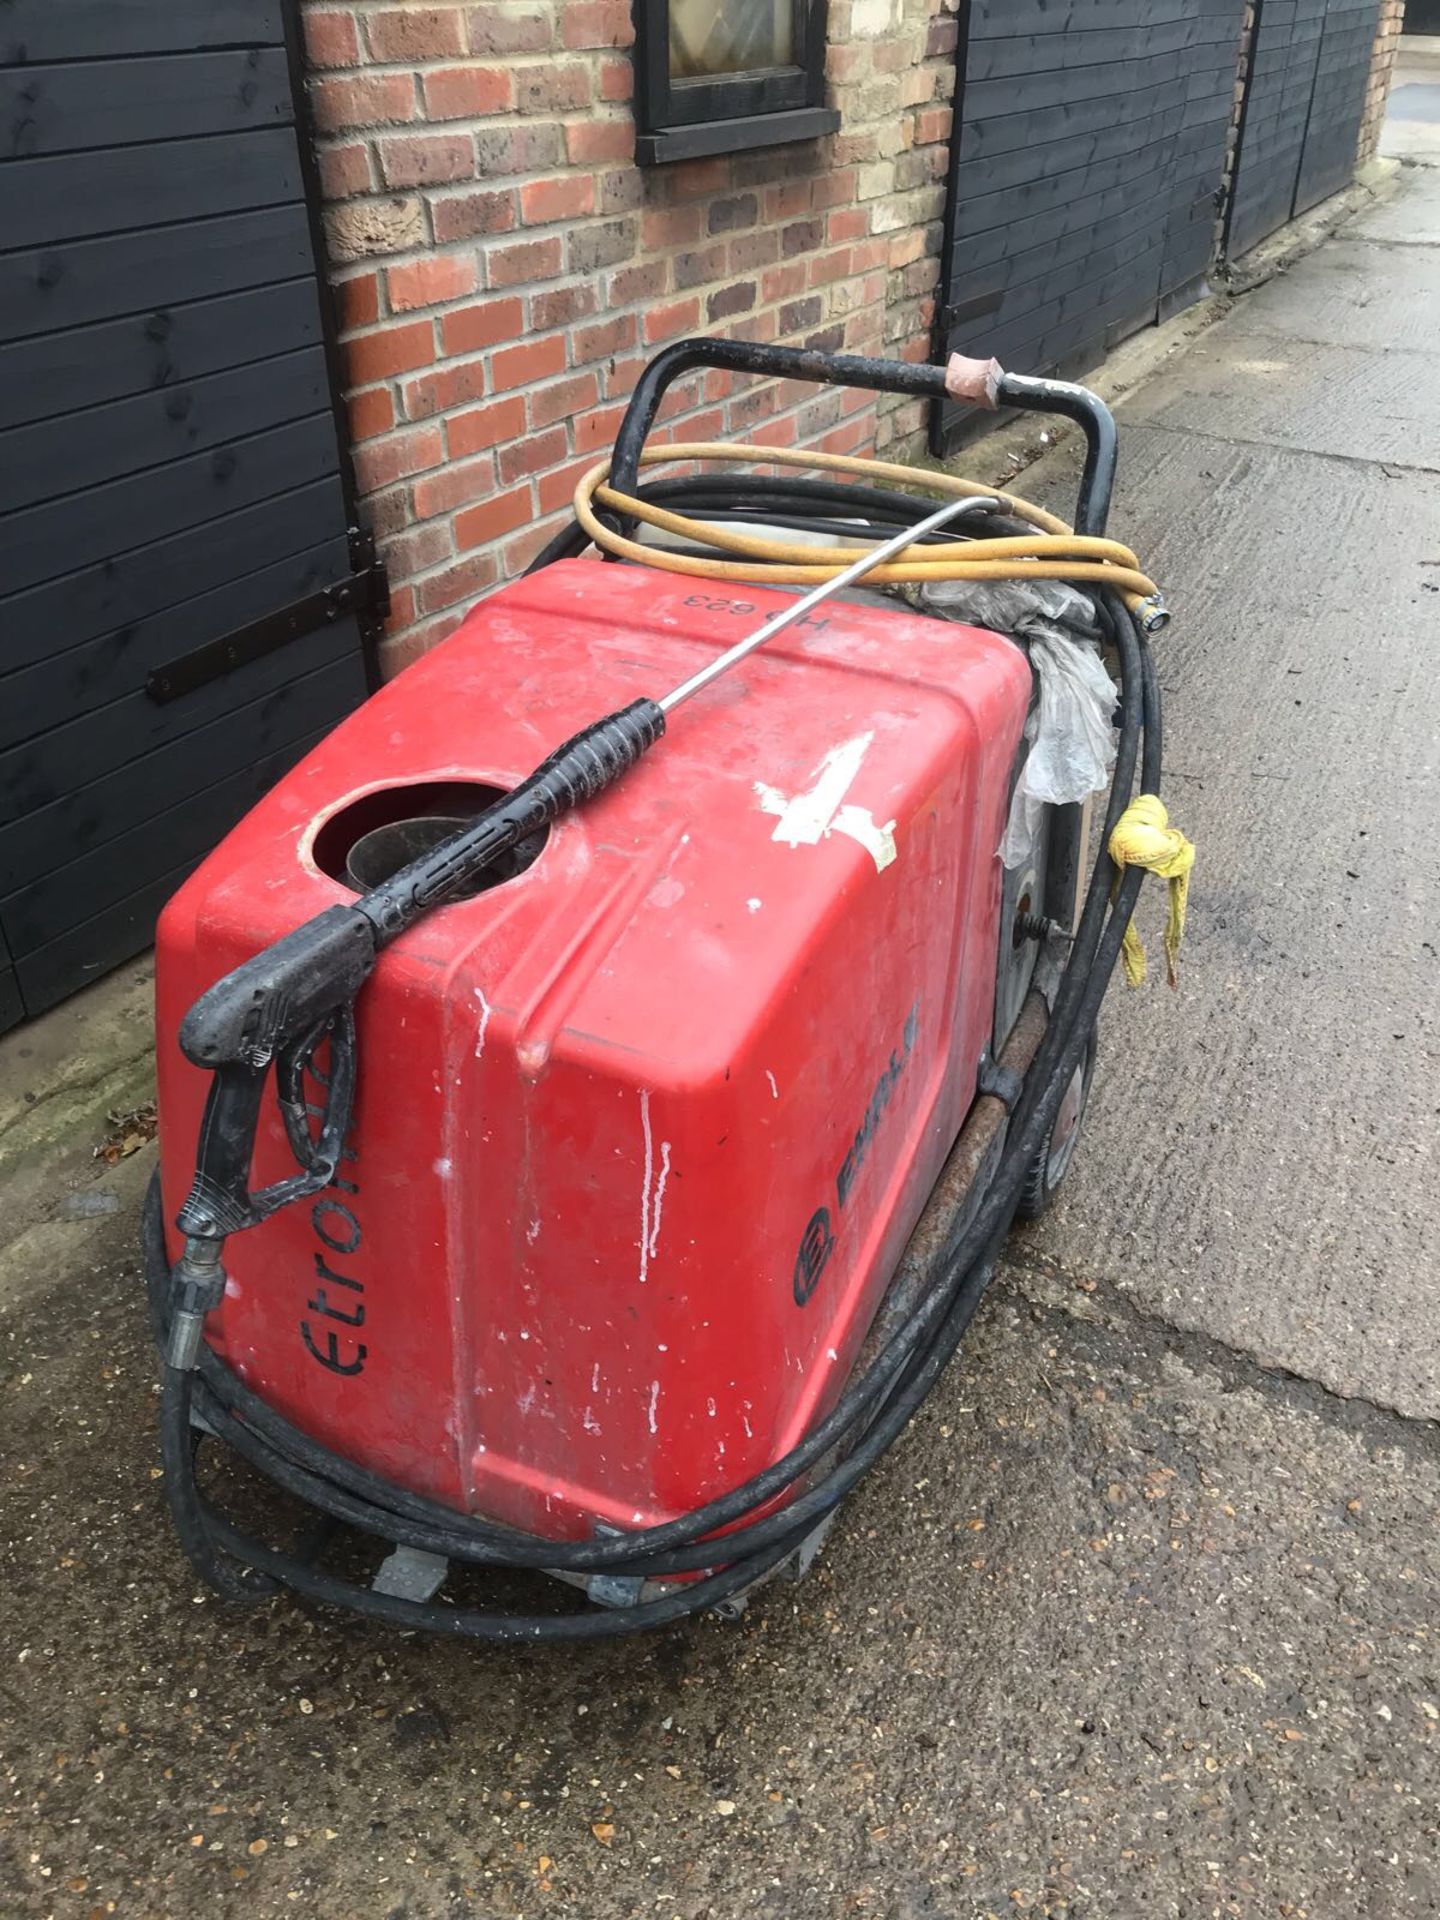 Ehrle HD623 Hot Water Pressure Washer (Located at Wyngray Farm, St Mary’s Lane, Upminster, RM14